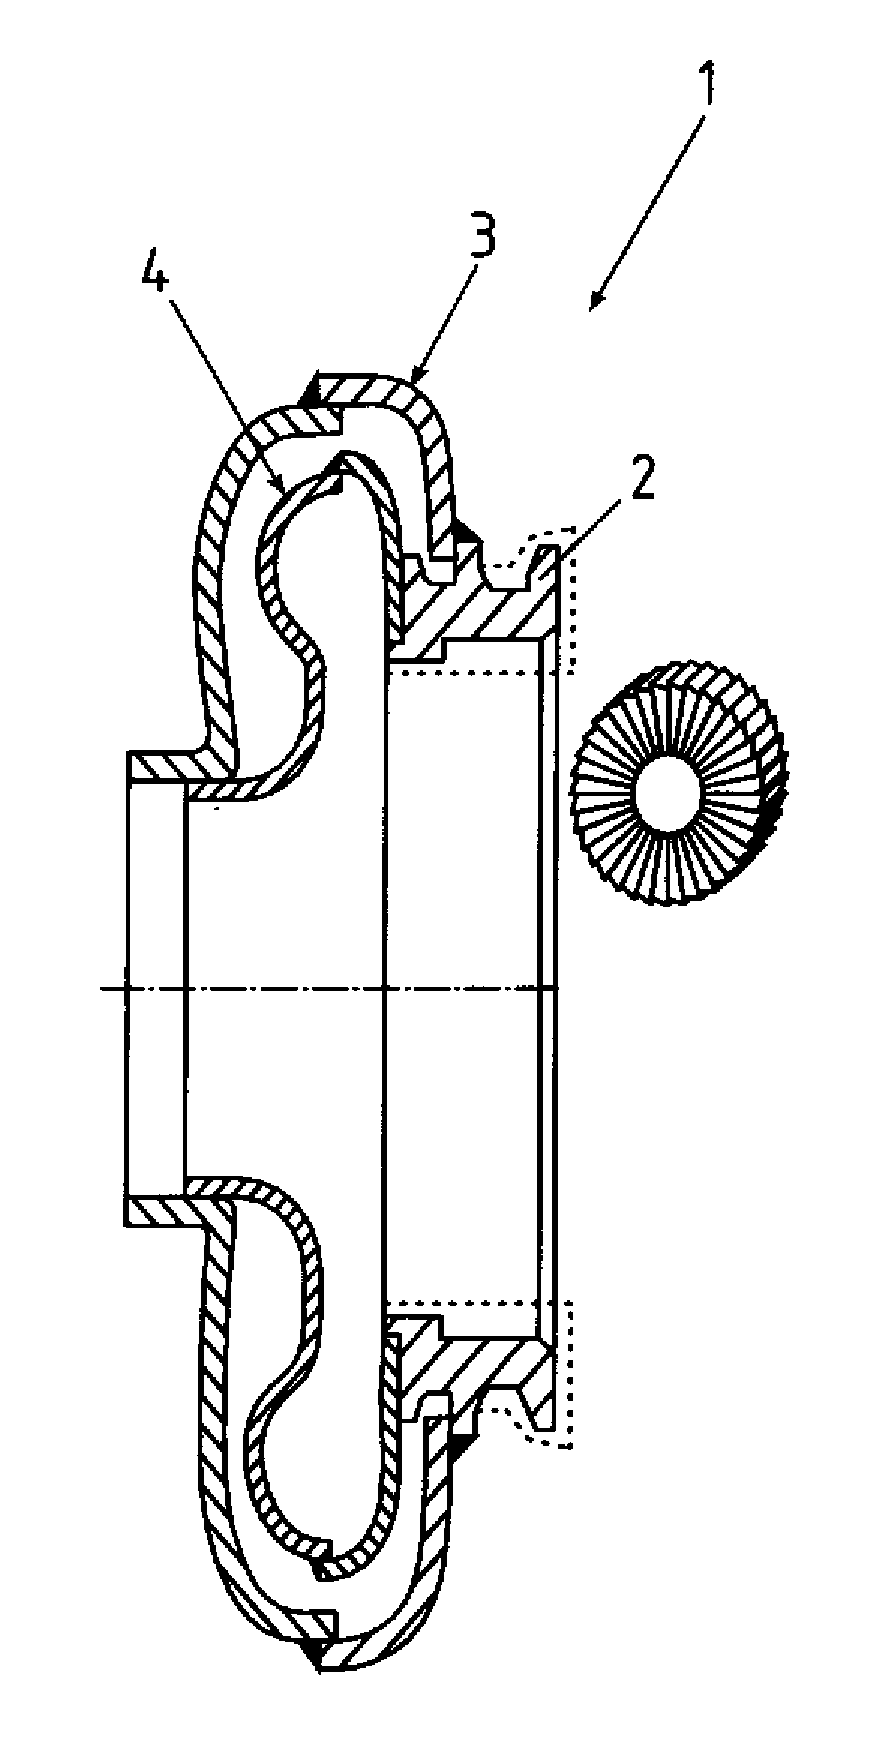 Method of making a turbocharger housing